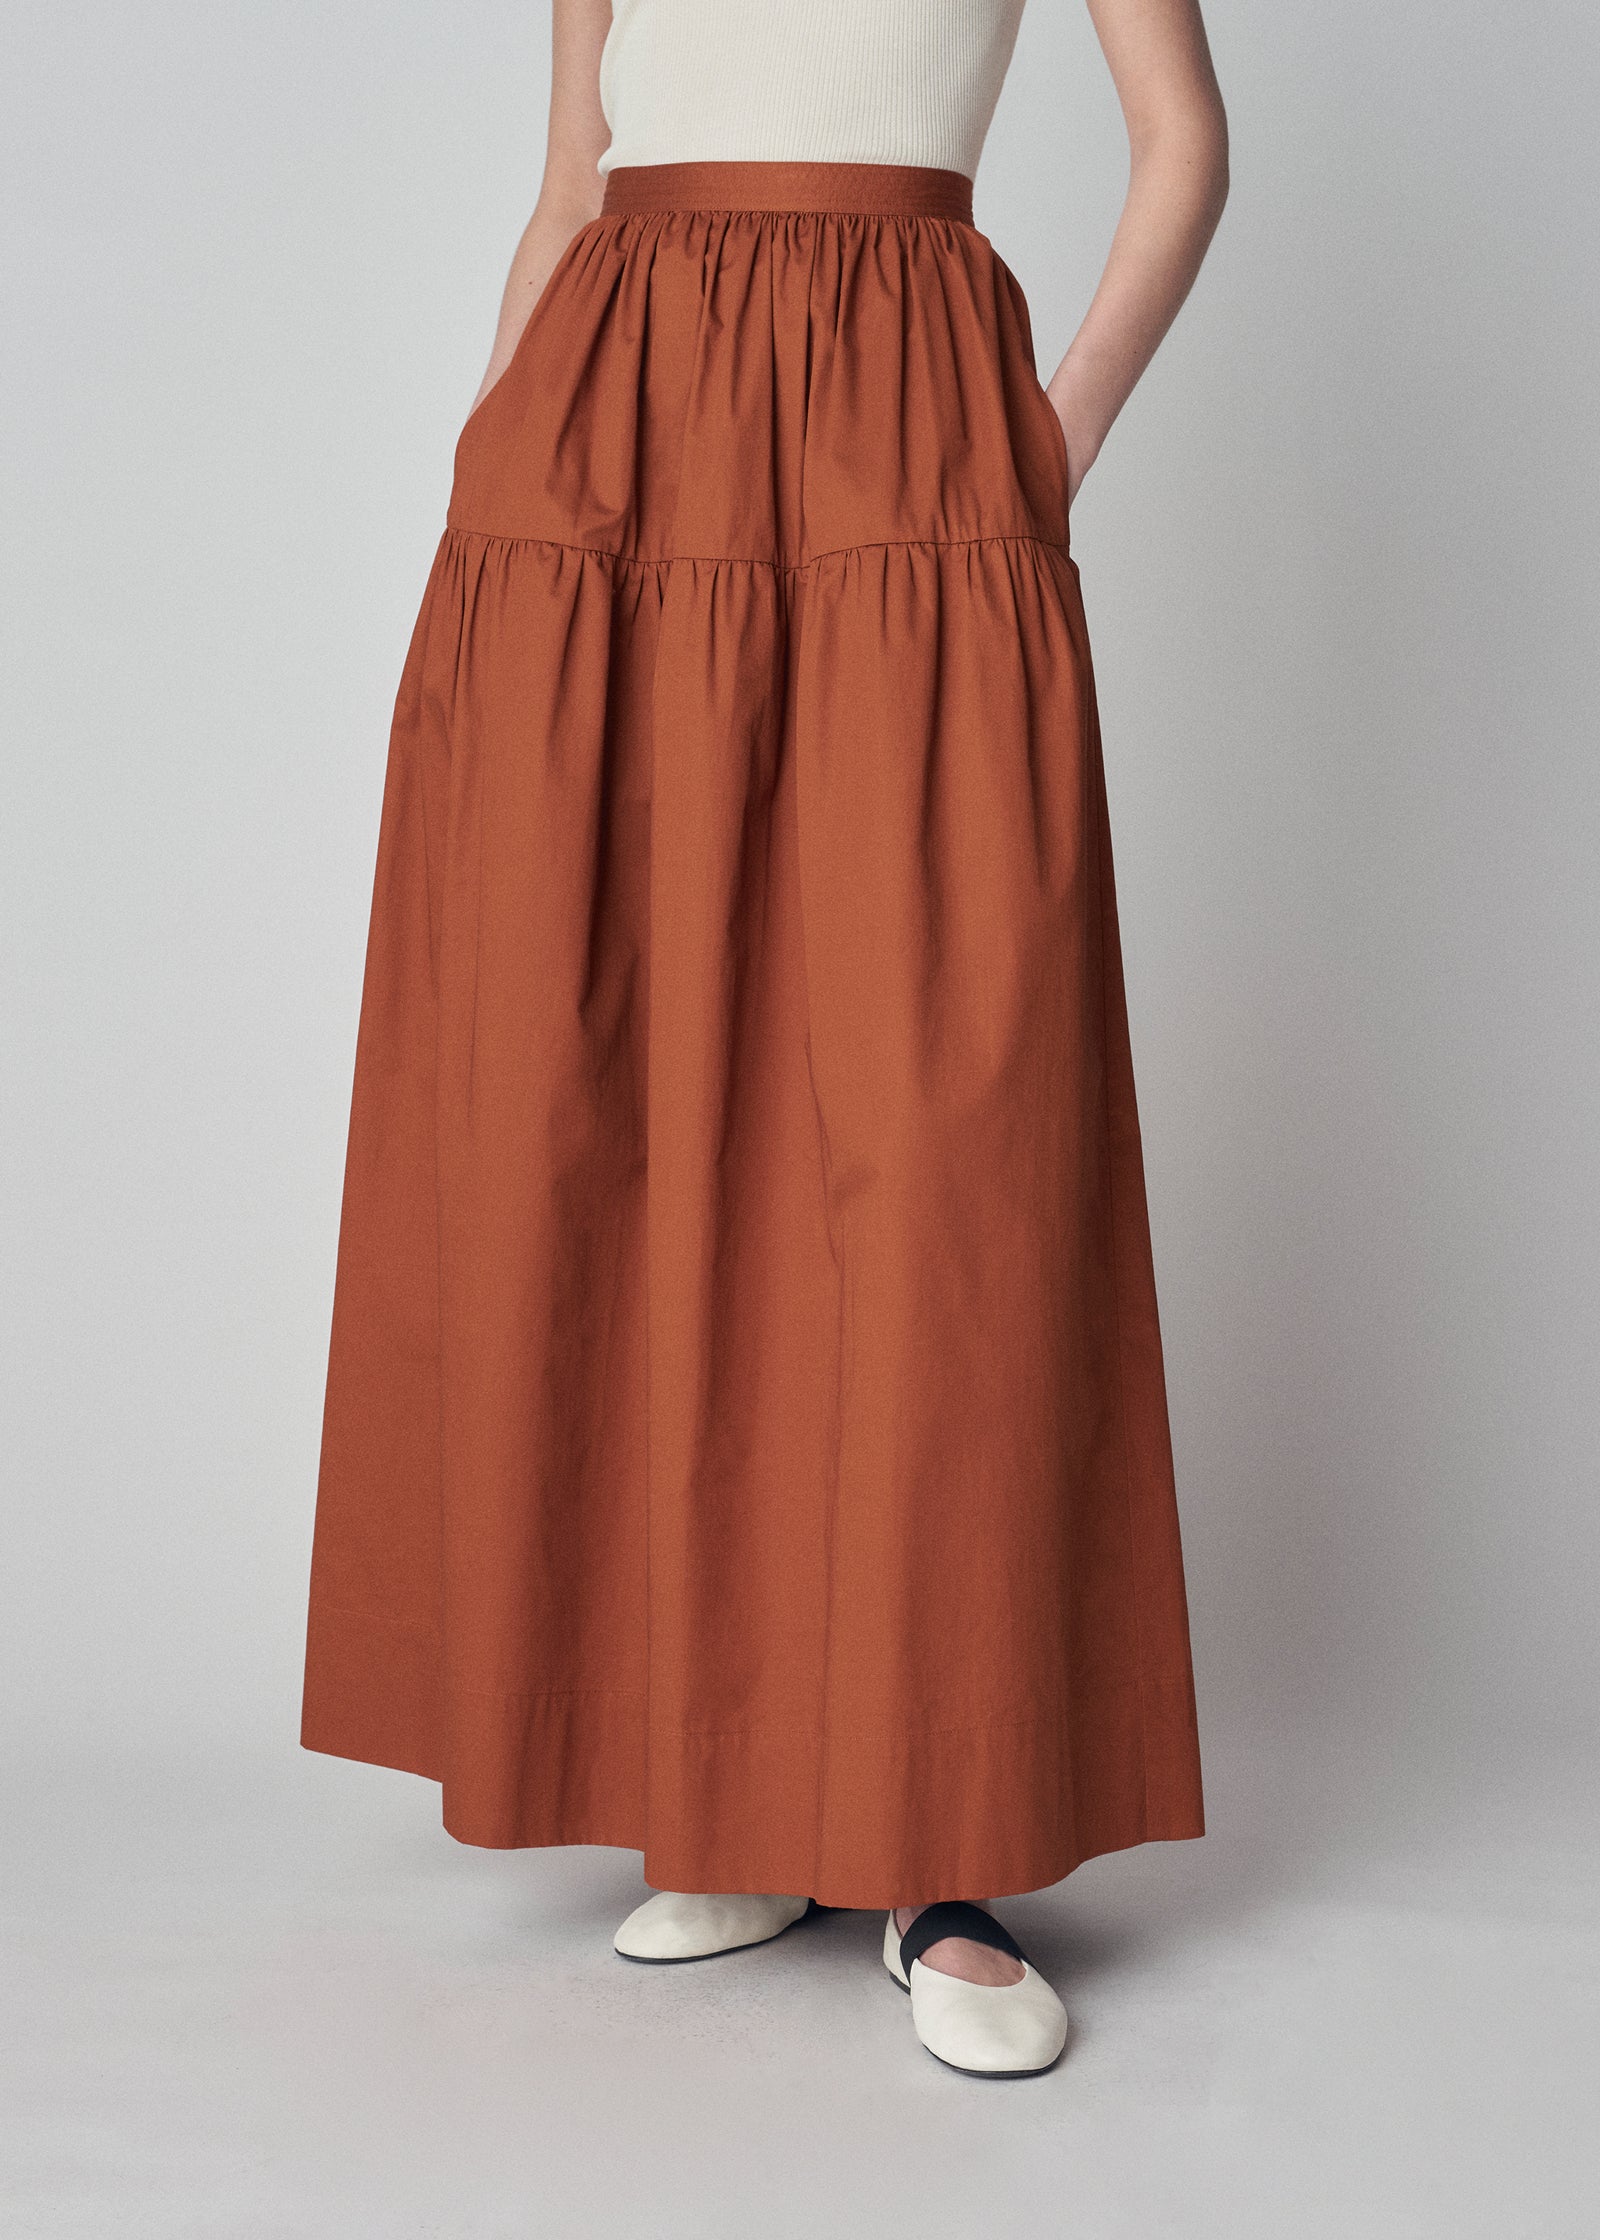 Tiered Midi Skirt Fitted Waist in Cotton Poplin  - Chestnut - CO Collections